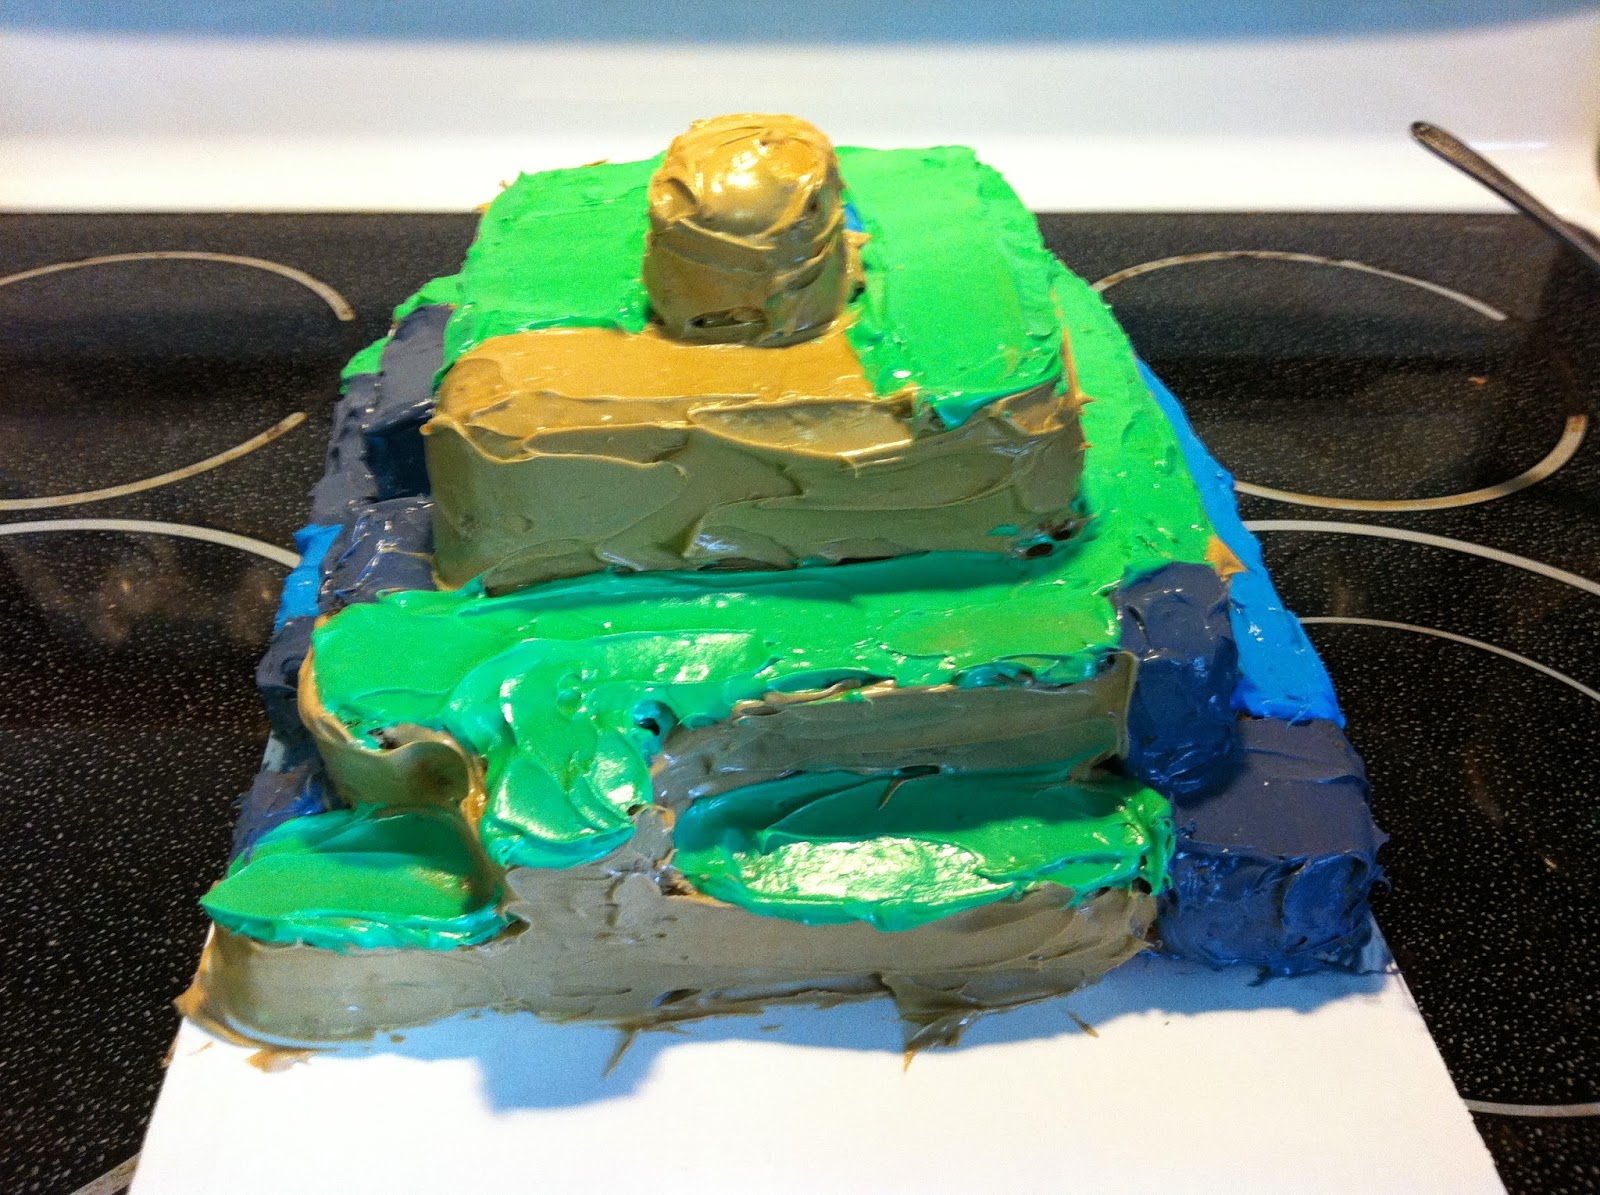 Minecraft cake side 4, featuring dirt and grass.